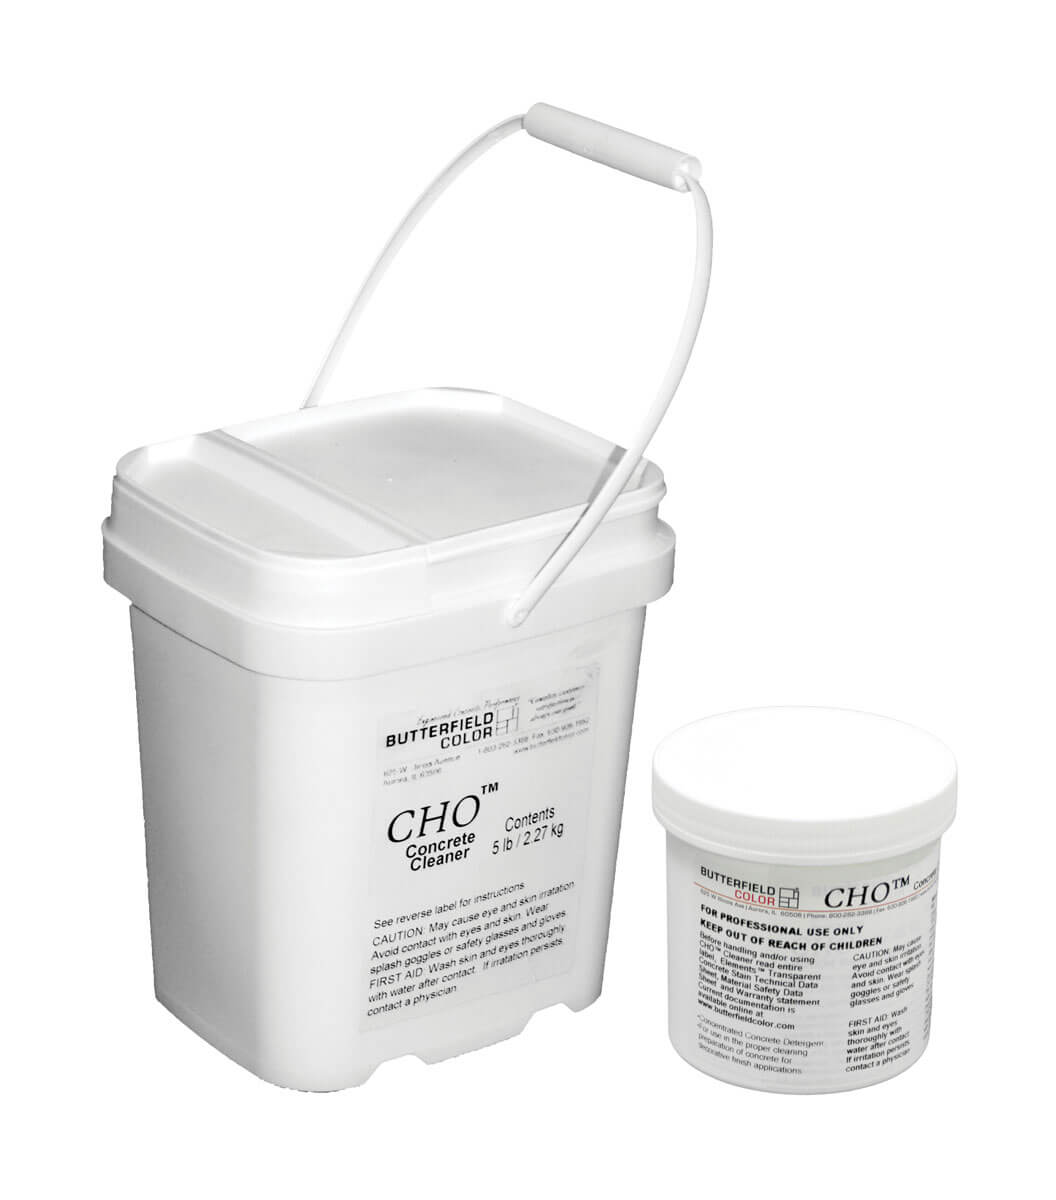 CHO™ Concrete Cleaner - Butterfield Color®